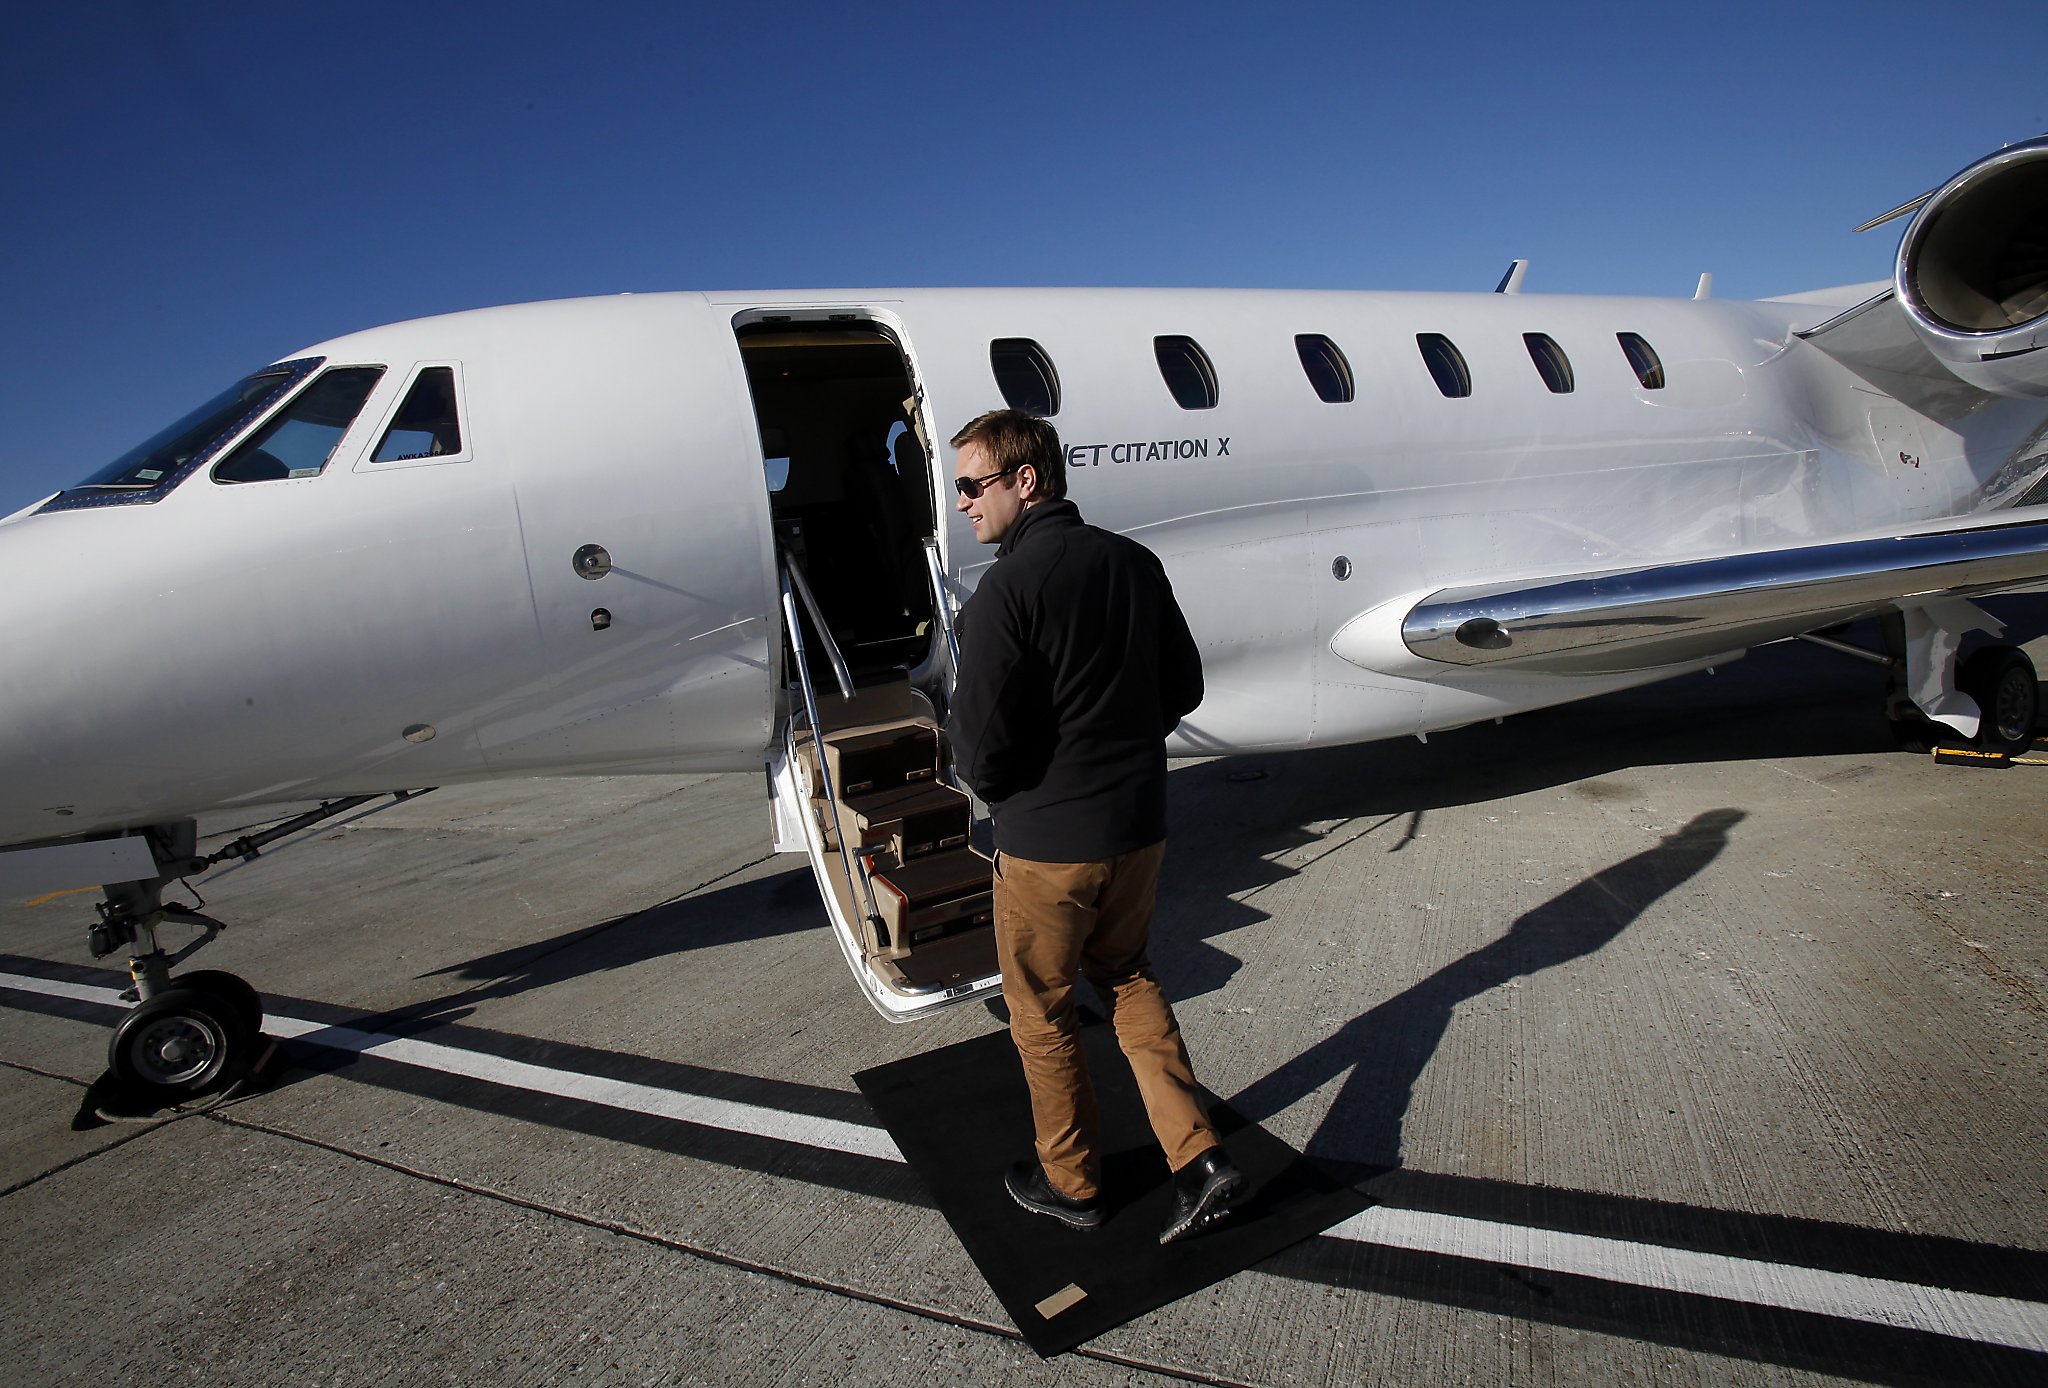 Private Jet Offers Wonderful If Fleeting Moments Sfgate